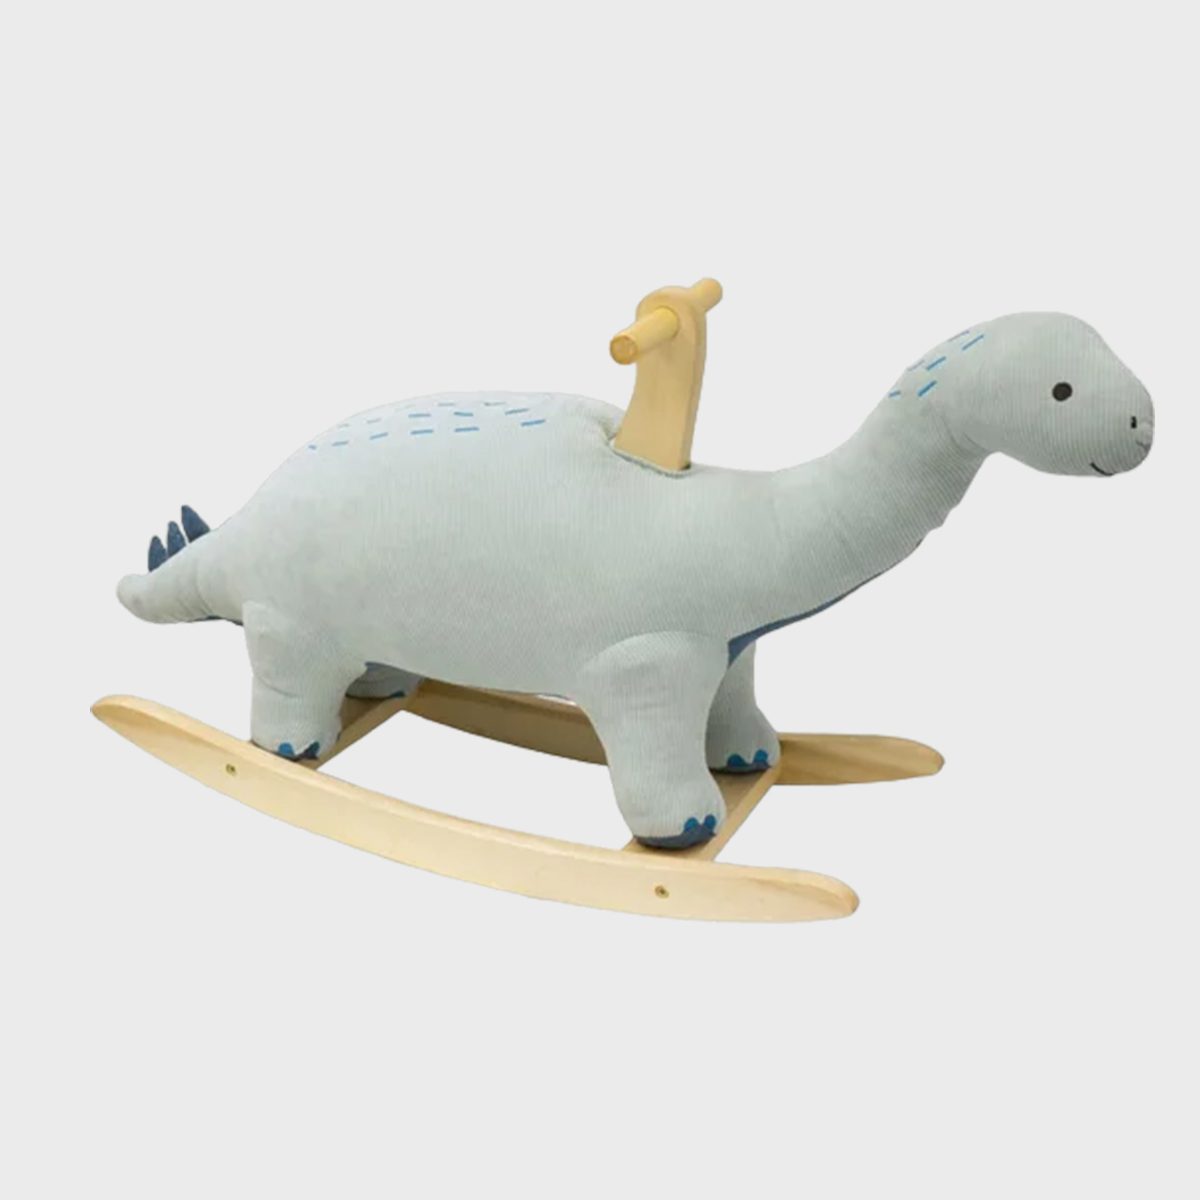 <p>This <a href="https://www.maisonette.com/product/dinosaur-rocker" rel="noopener noreferrer">prehistoric rocker</a> is sure to be the highlight of the nursery and a favorite toy as the baby grows. It boasts soothing, muted colors along with sturdy wooden handles and rockers for years of fun play.</p> <p class="listicle-page__cta-button-shop"><a class="shop-btn" href="https://www.maisonette.com/product/dinosaur-rocker">Shop Now</a></p>